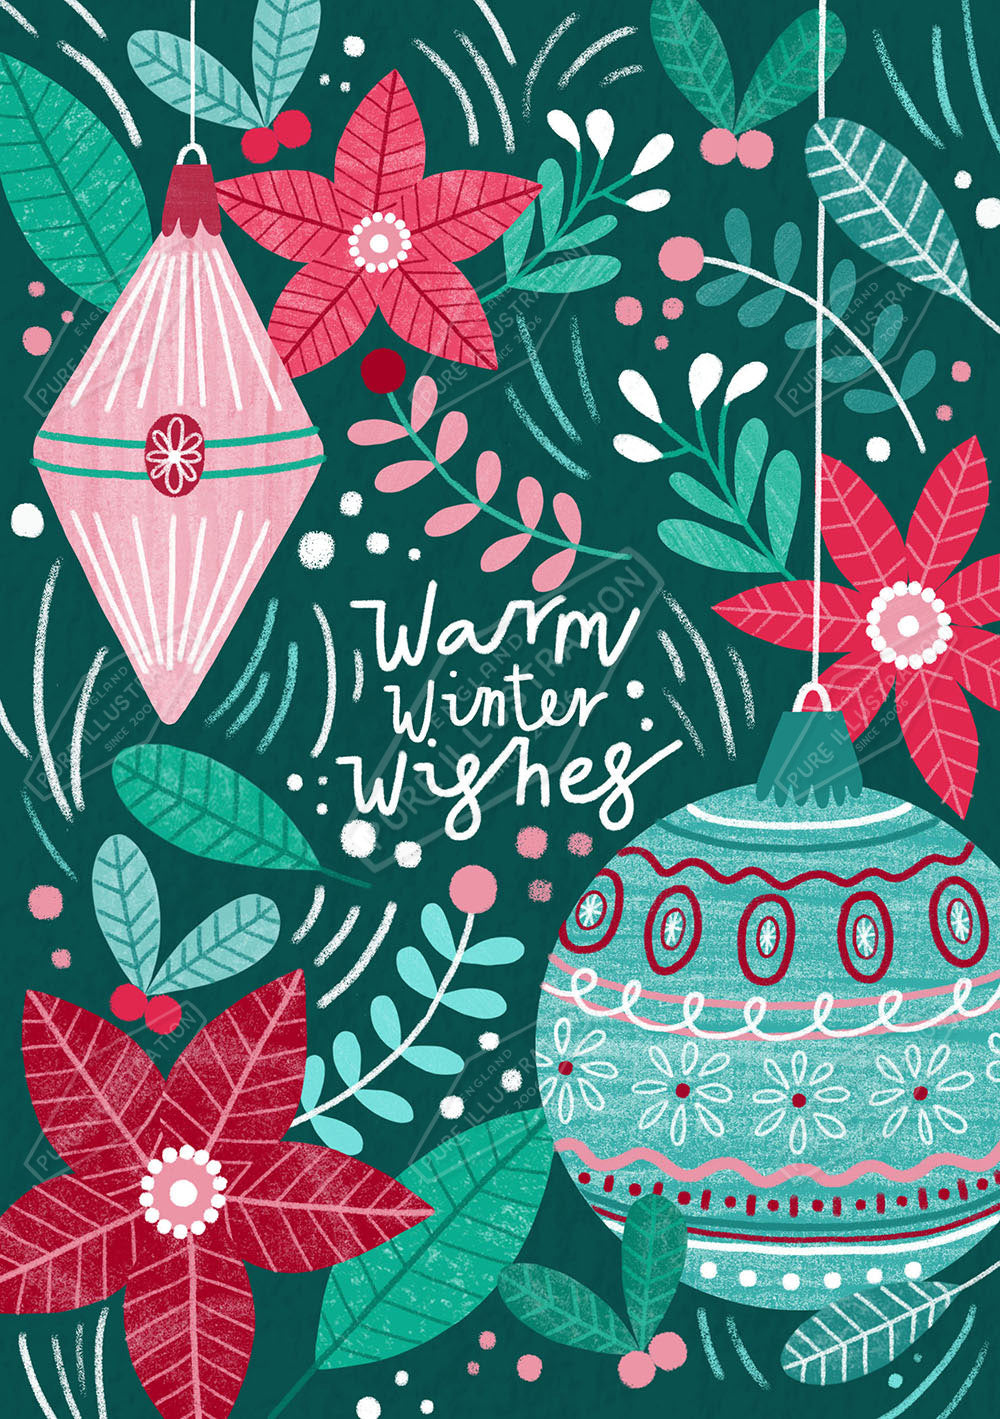 00034872LBR - Winter Wishes - Christmas Card / Pattern Design by Leah Brideaux - Pure Art Licensing Agency